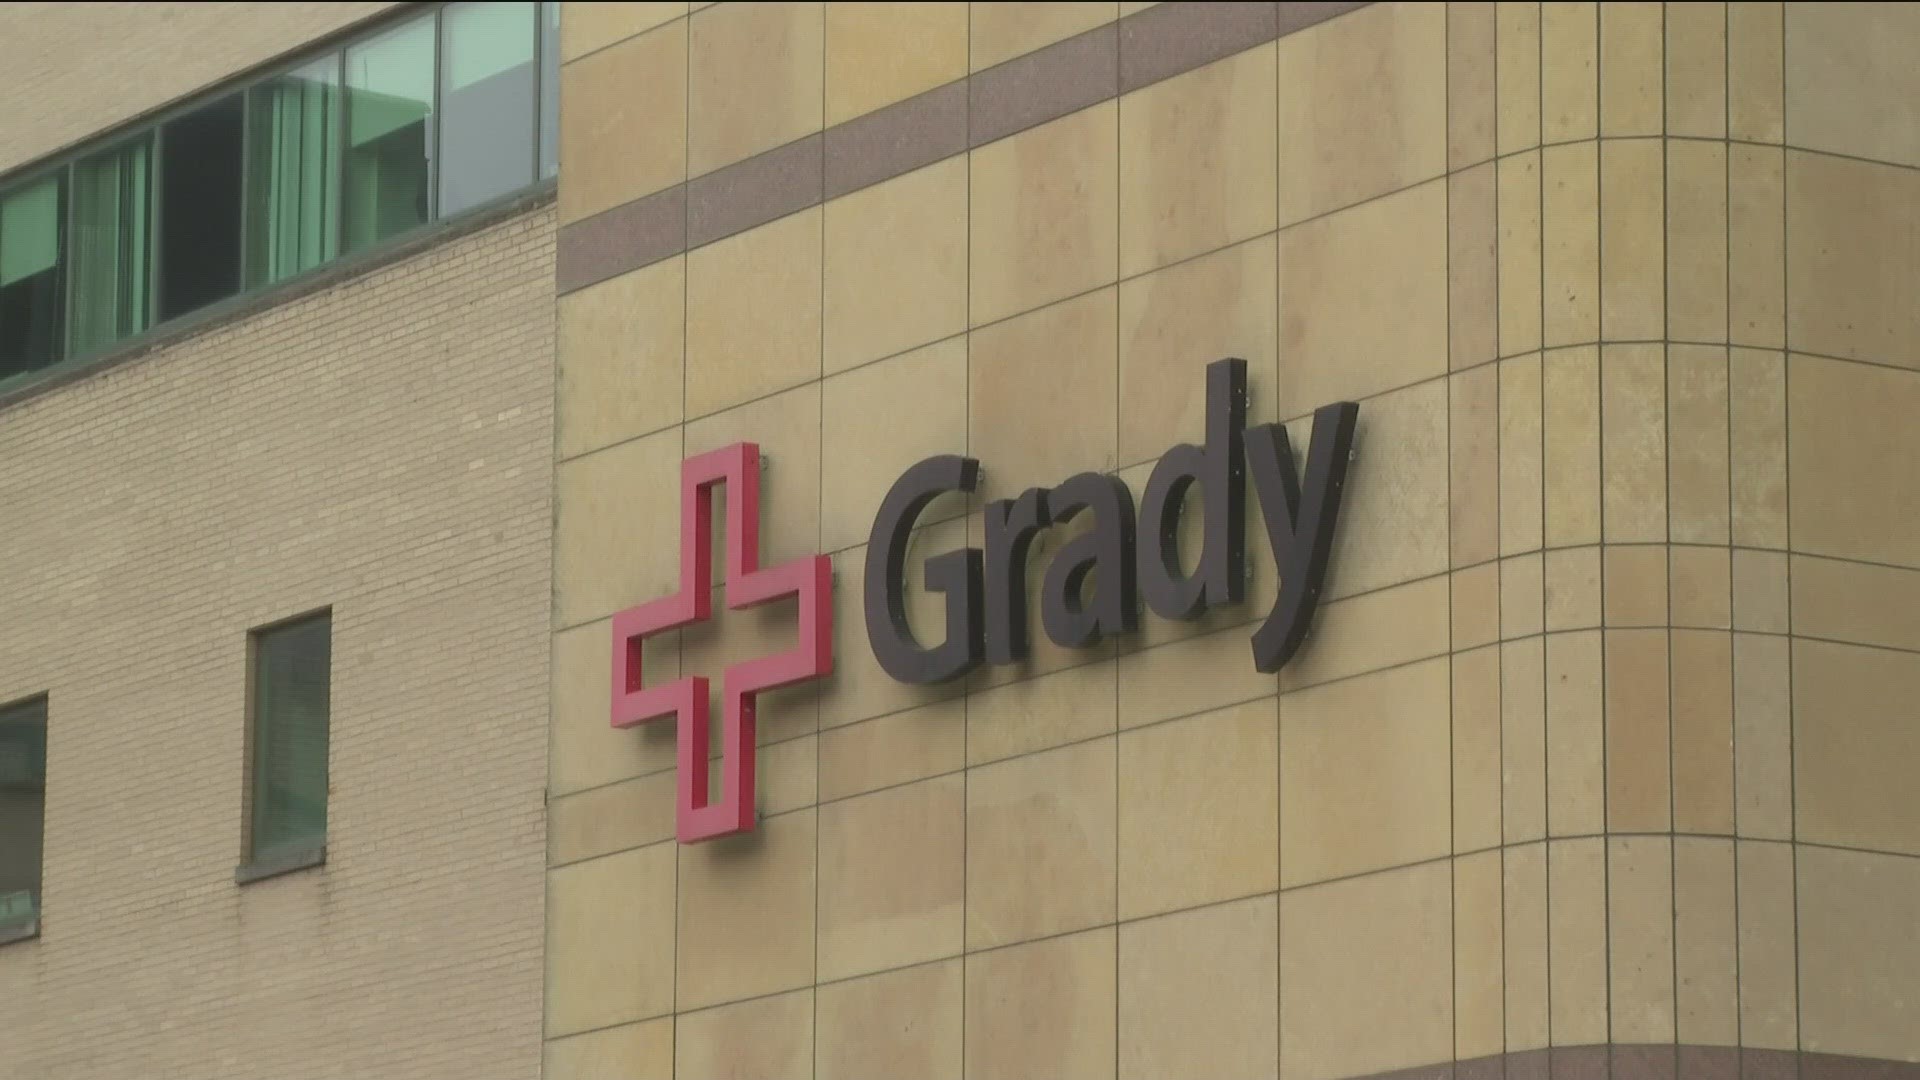 These new locations will be south of I-20, an area that Grady said has seen an increased demand for healthcare resources.